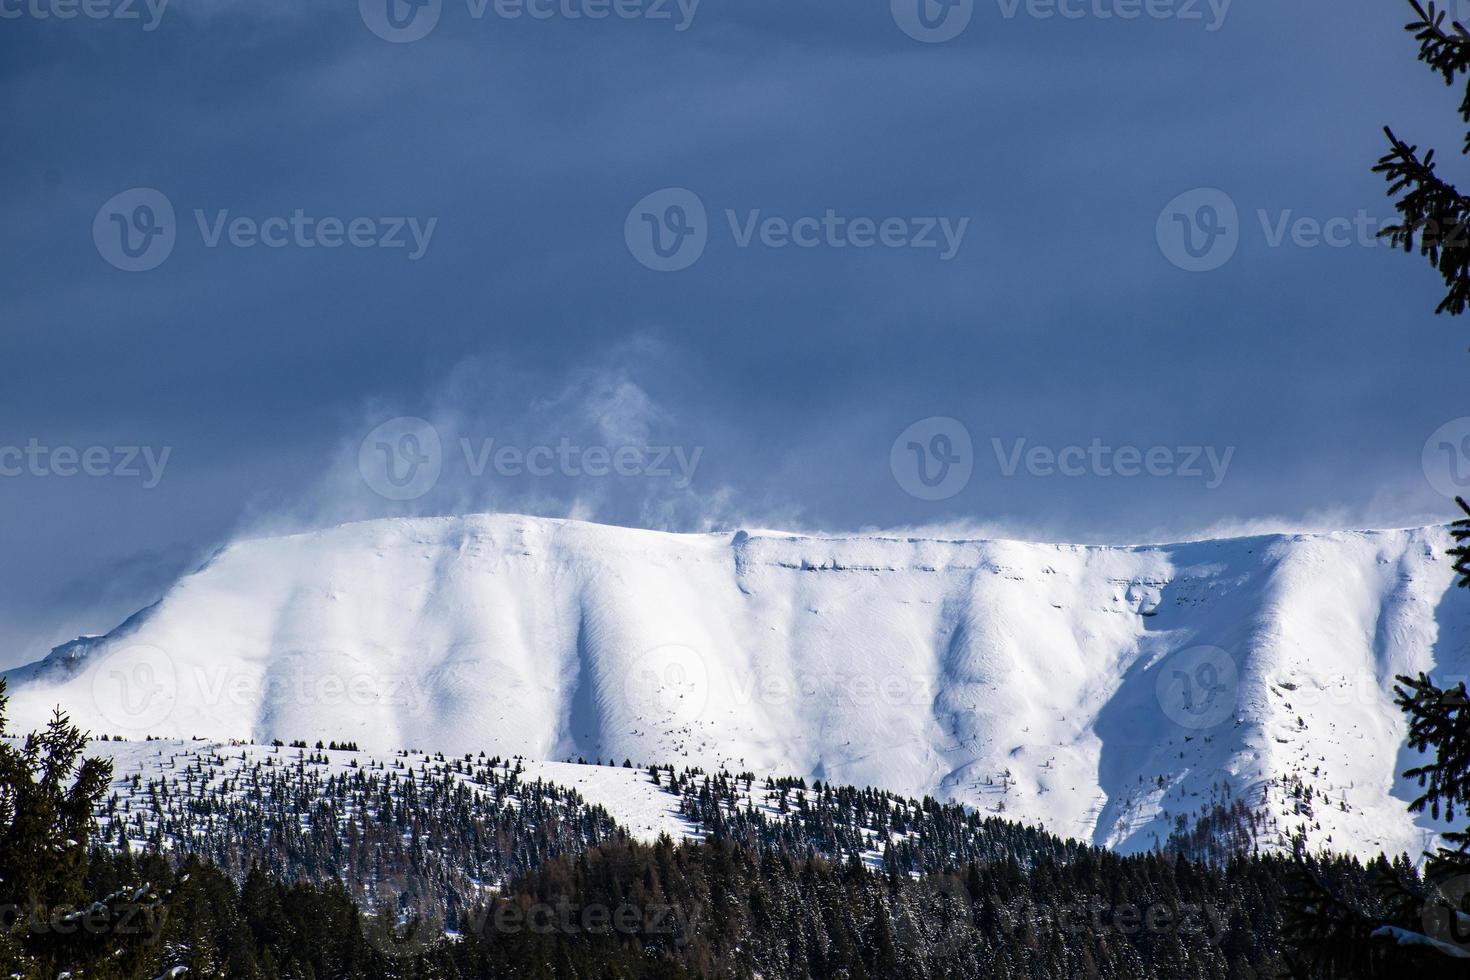 Portule covered in snow in winter on the Asiago plateau, Vicenza, Veneto, Italy photo